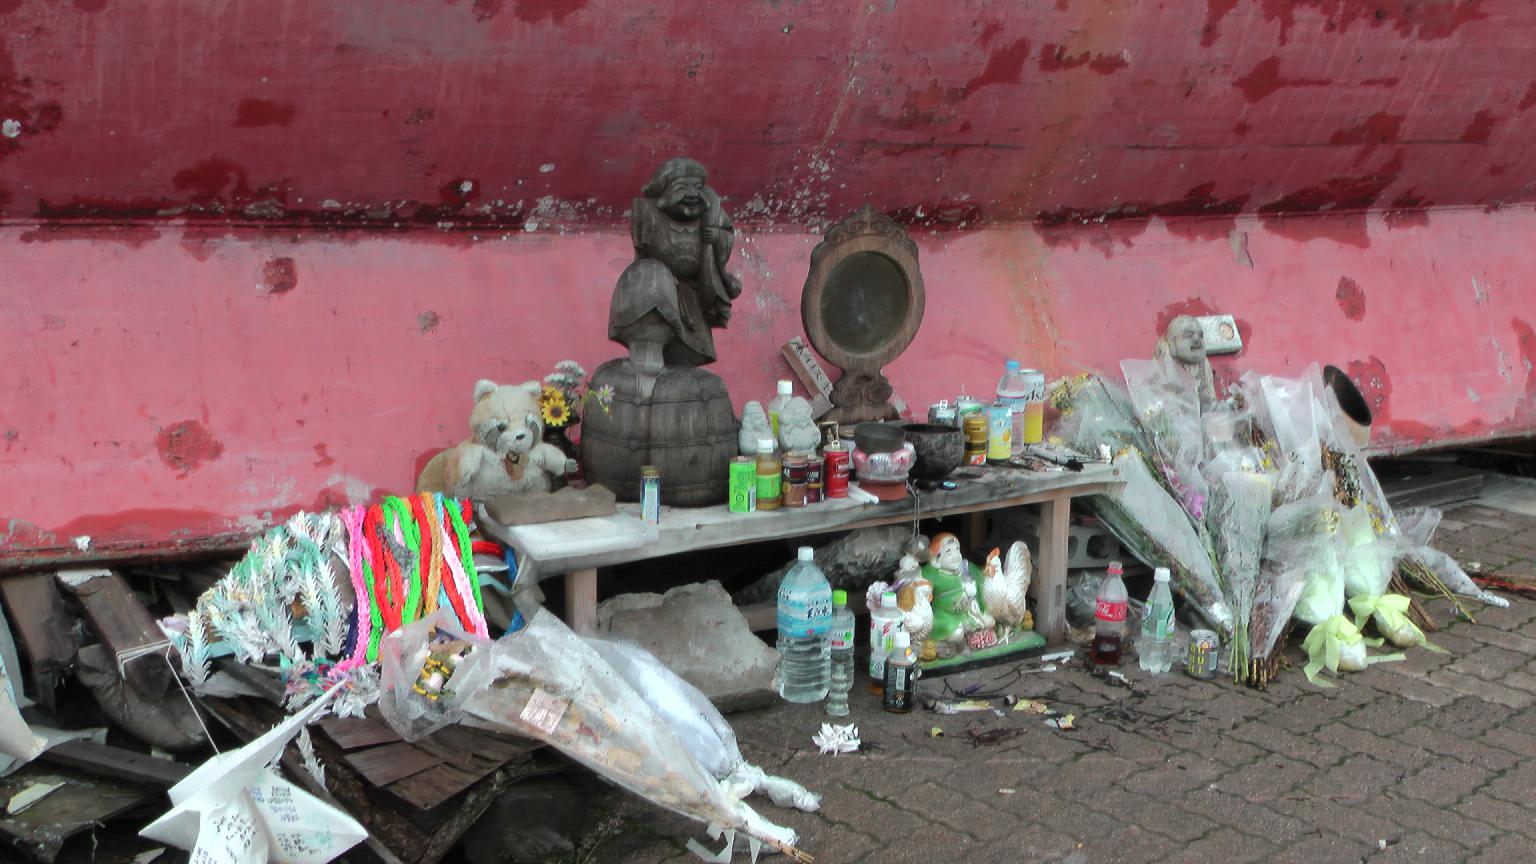 offerings in front of the Ship